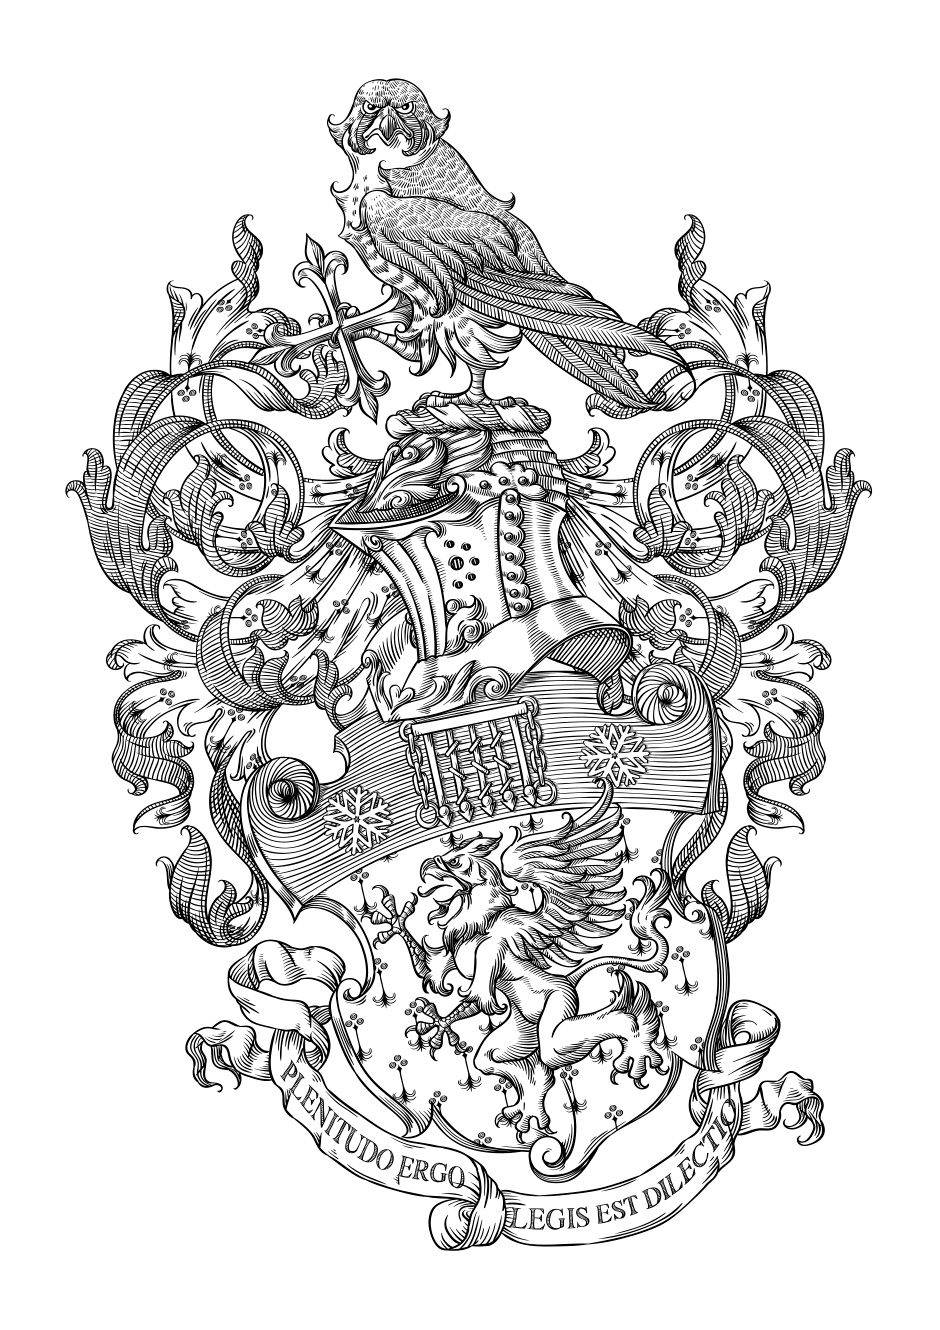 Coat of Arms of Travis Smith 02